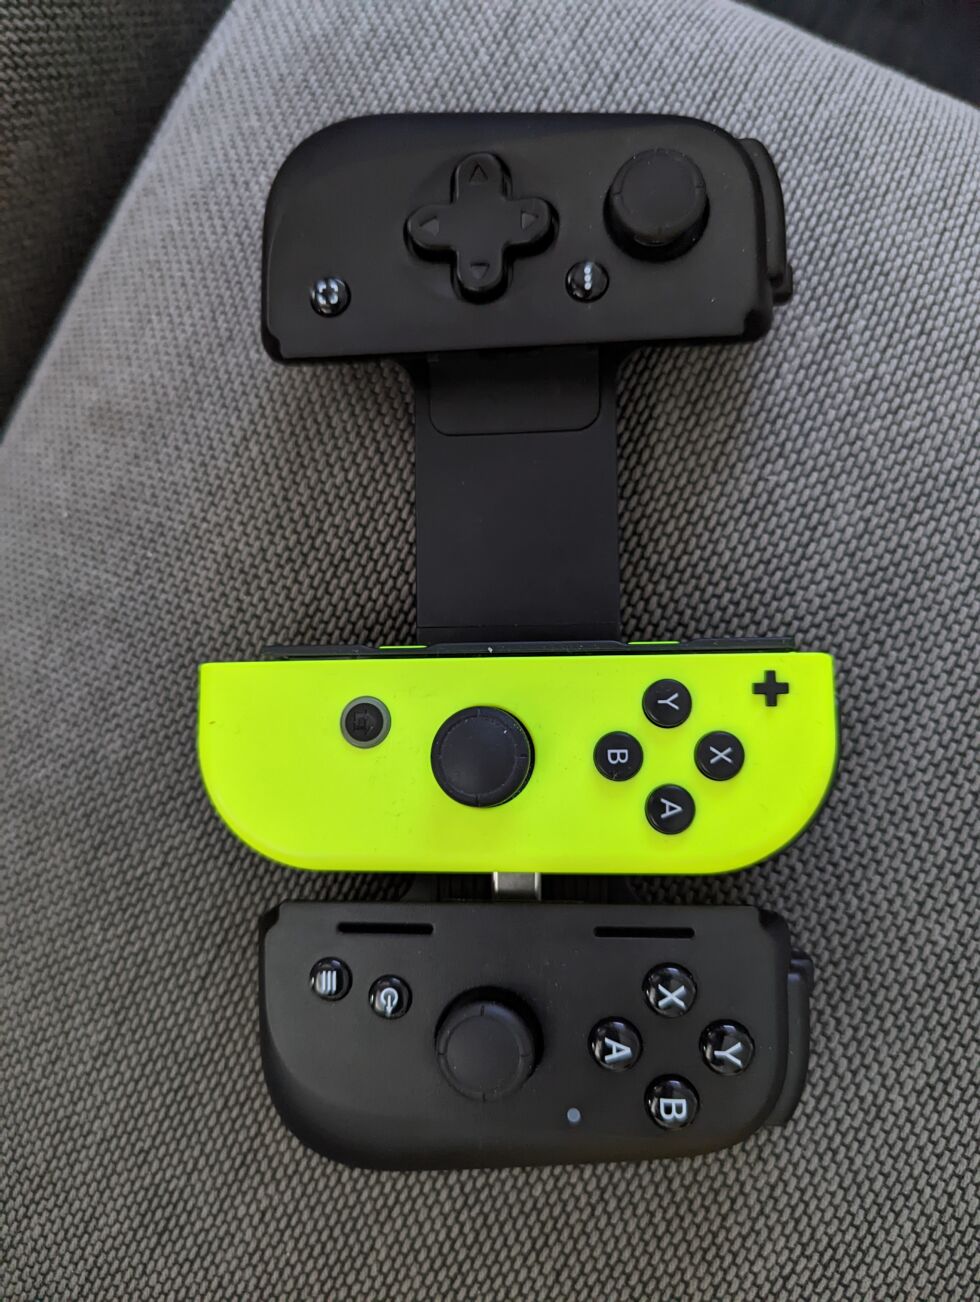 A picture to illustrate my point about the distance between the ABXY array and the joystick;  Kishi V2 in comparison to the Switch Joy-Con.